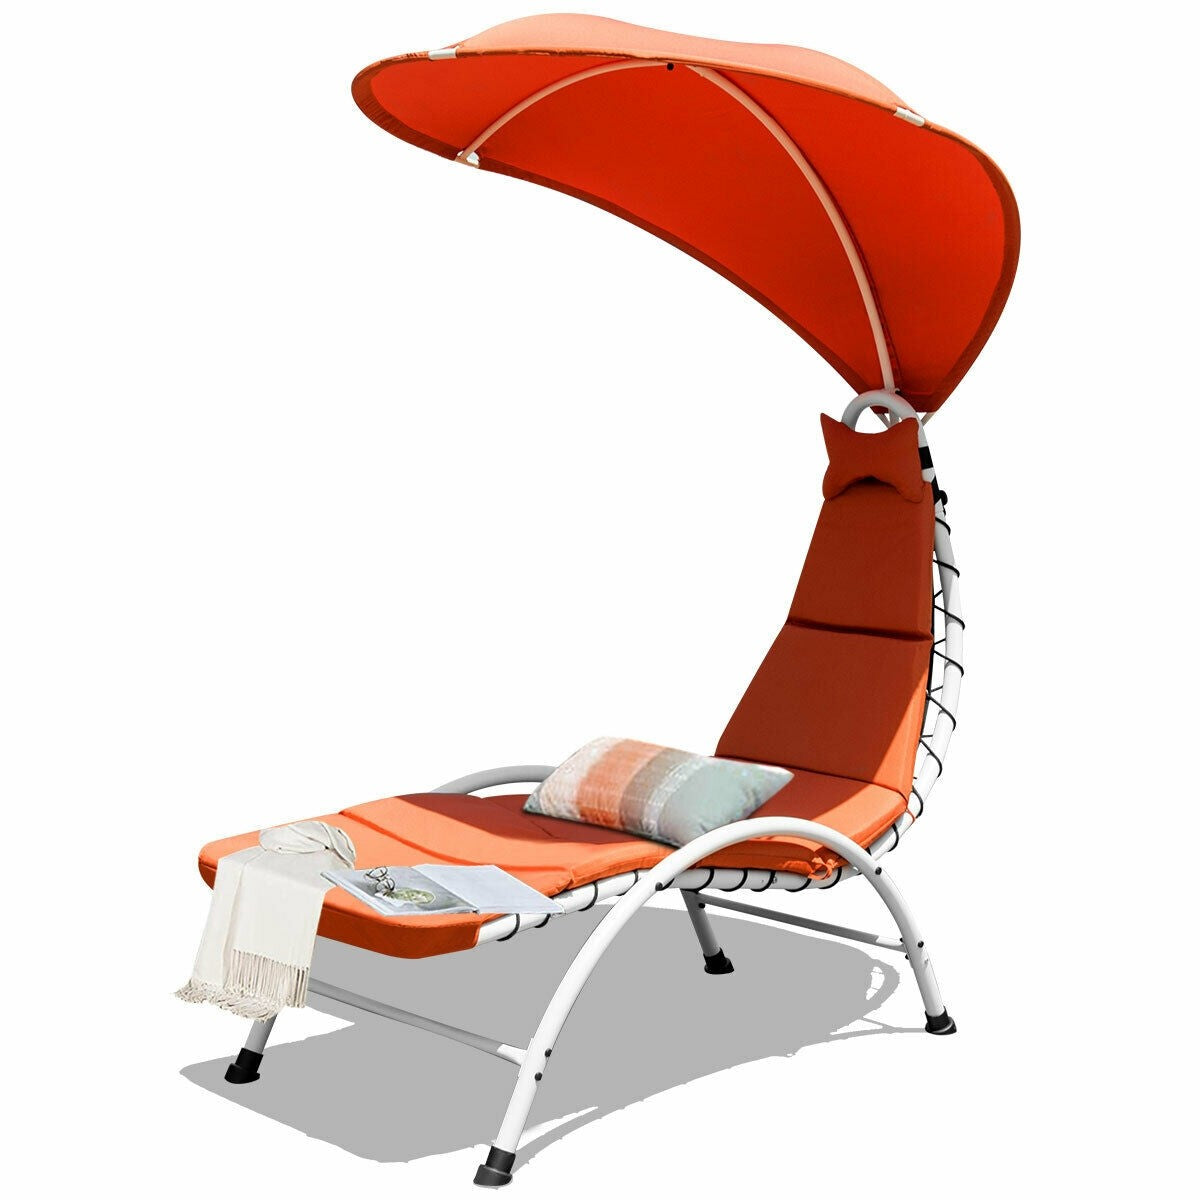 Lounger Chair w/ Canopy, Removable Headrest, Patio Chaise with Cushion